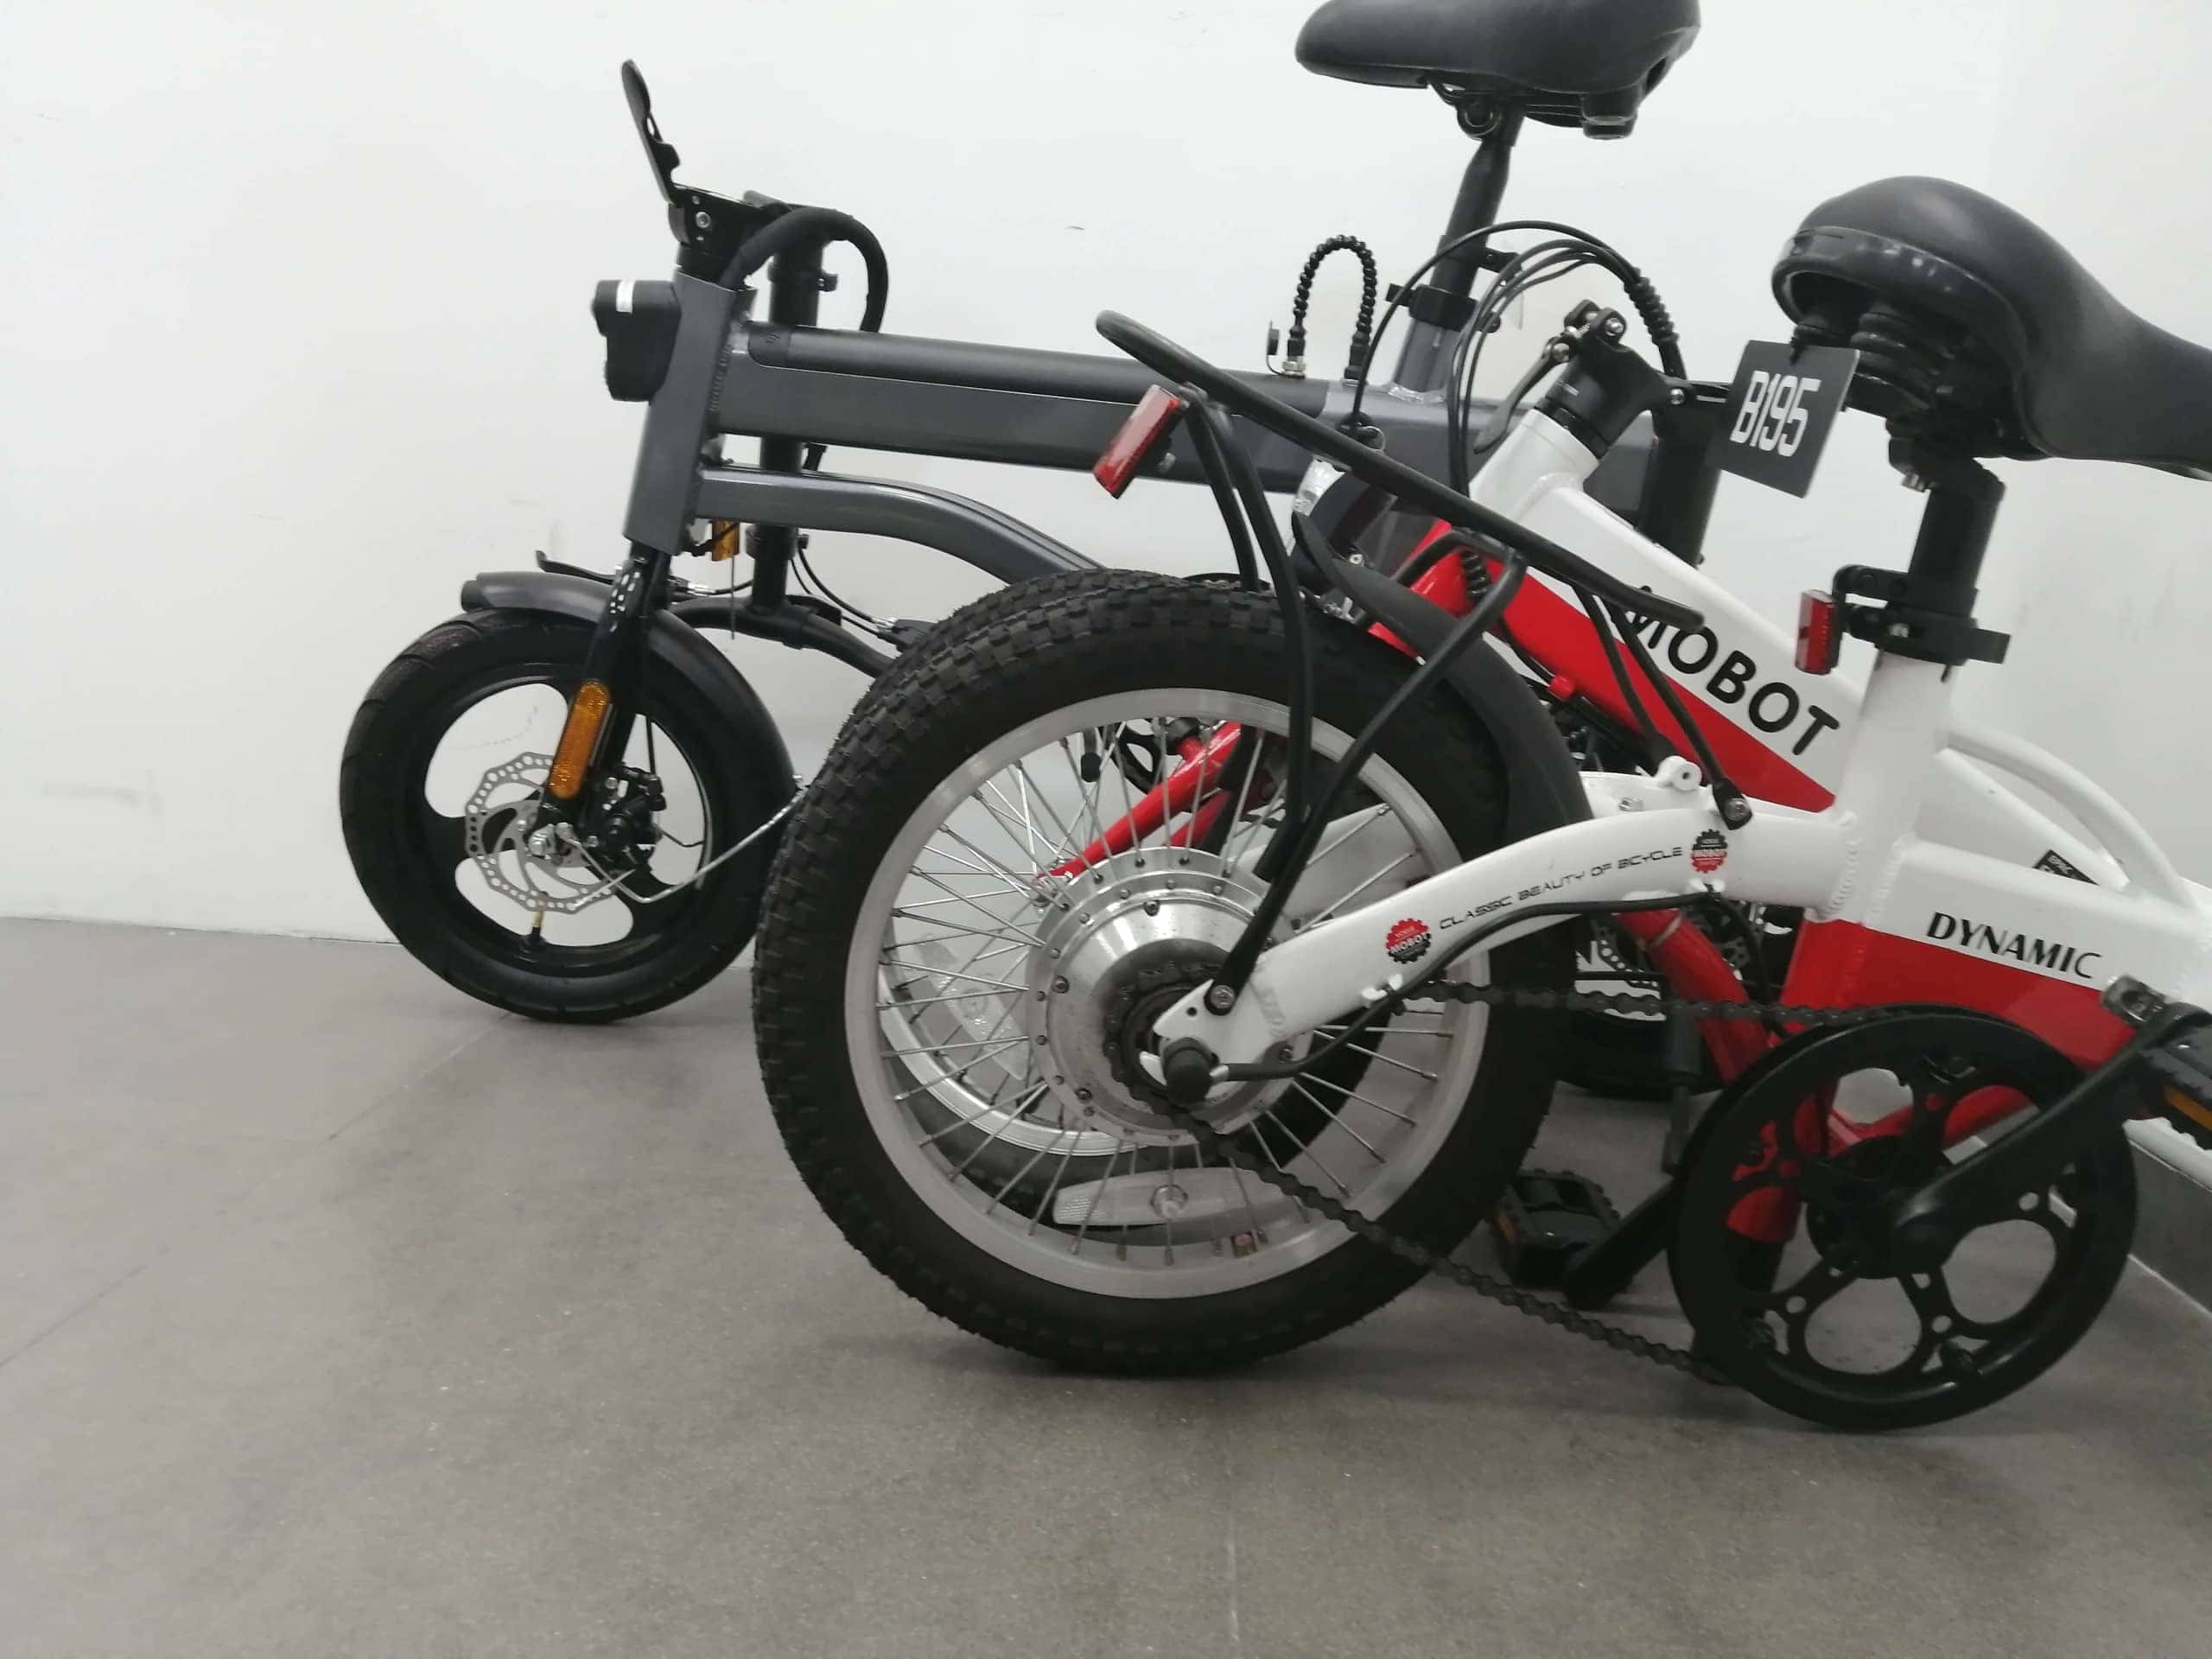 JI MOVE LTA approved ebike folded comparison scaled - Review of JI-MOVE LC, the most compact LTA approved ebike?